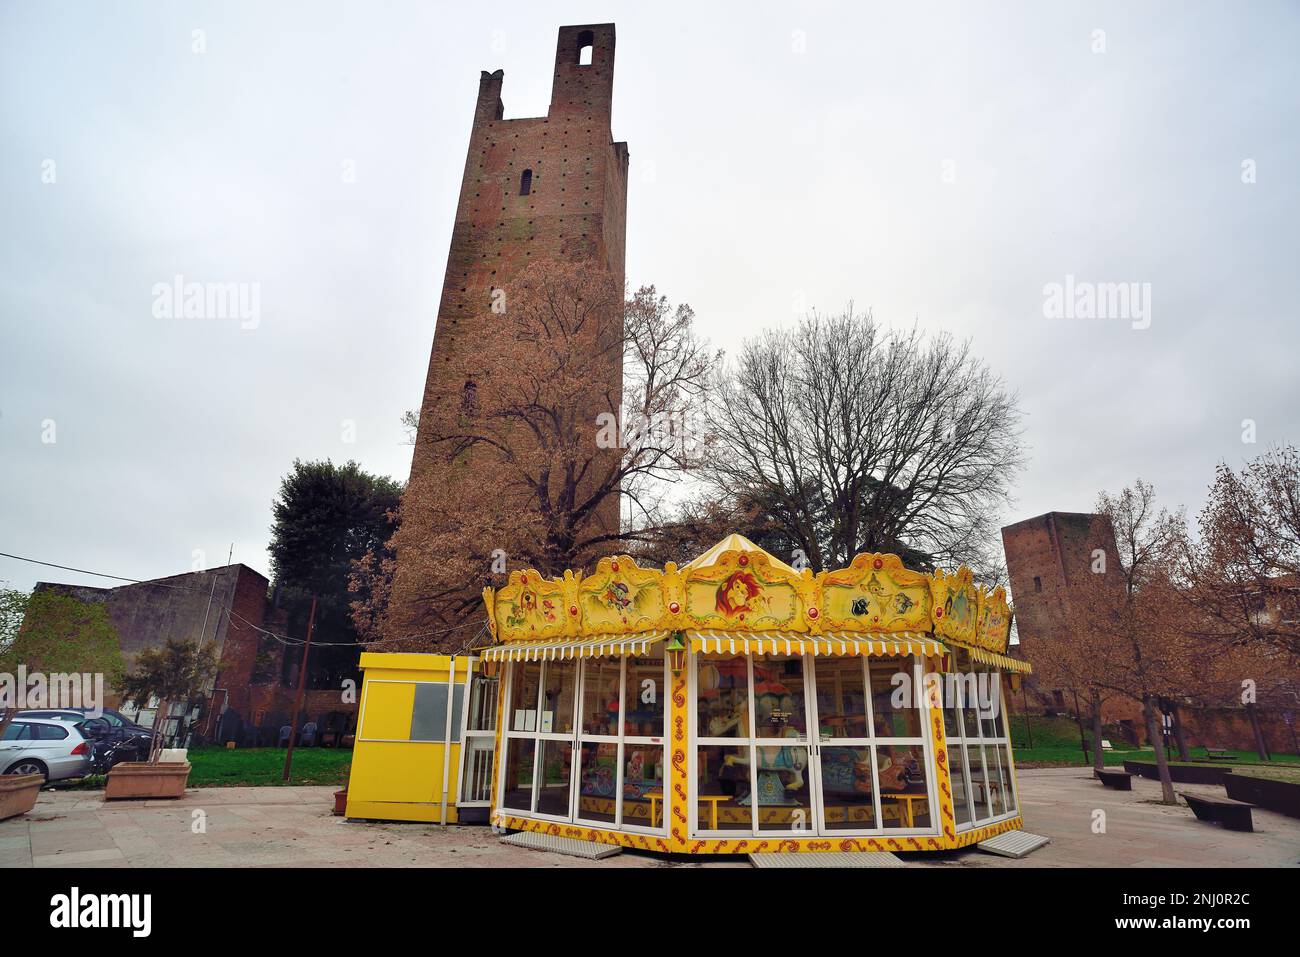 Rovigo, Italy. Donà tower L and Grimani tower or Mozza tower R. the two medieval towers were part of the ancient city walls. In the foreground, a carousel for children. Stock Photo